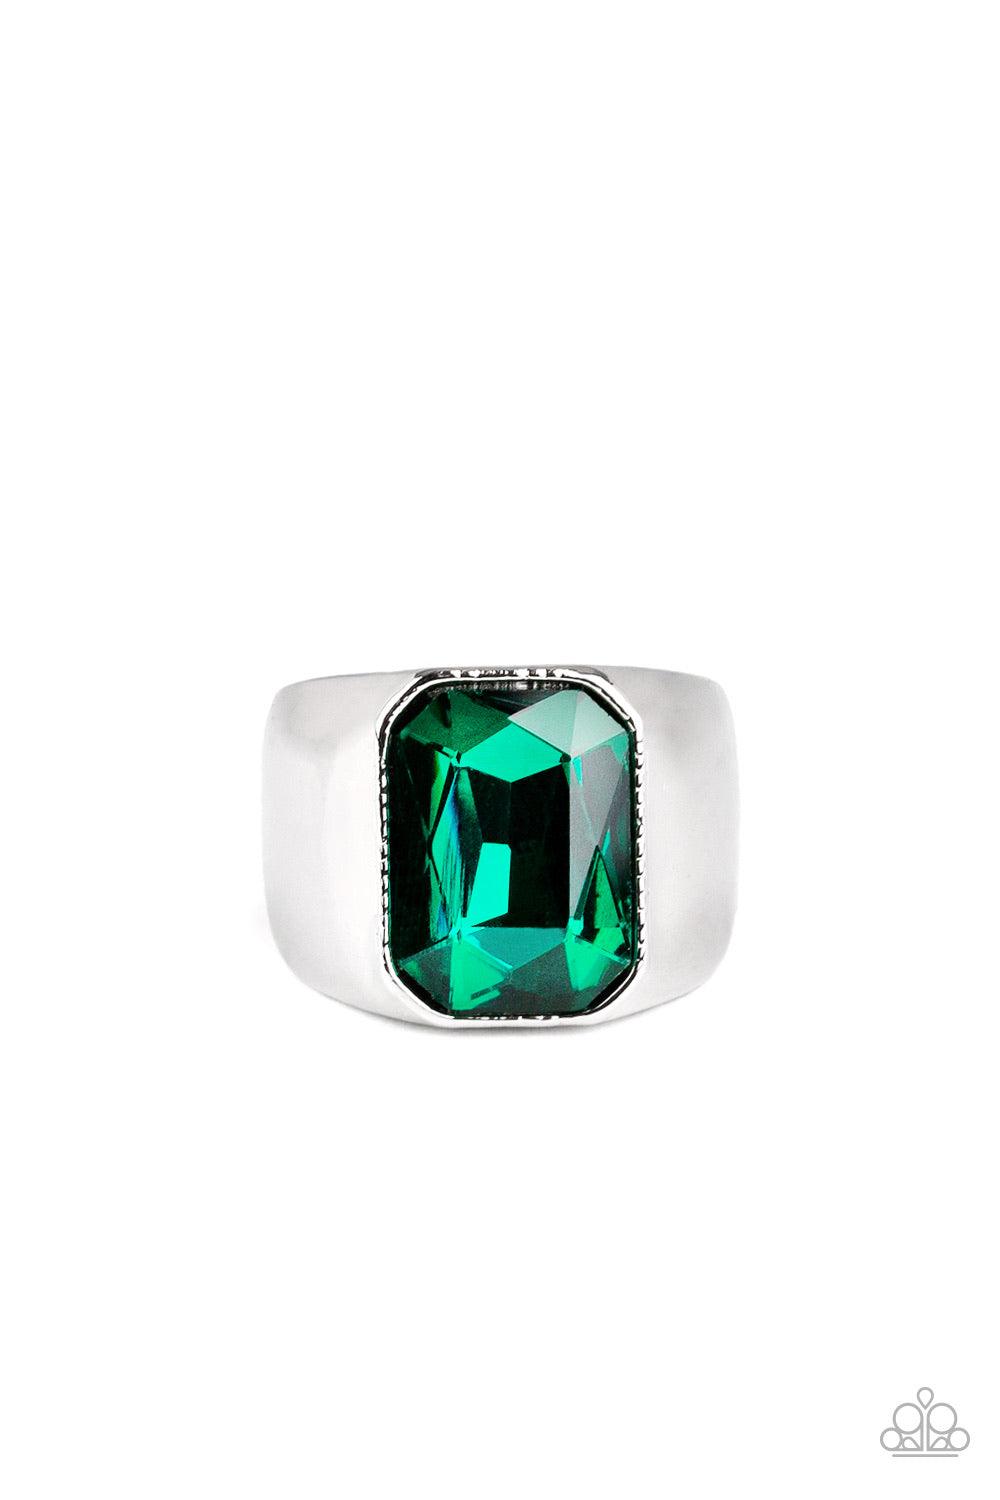 Paparazzi Accessories Scholar - Green Featuring a kingly emerald style cut, an oversized green rhinestone is pressed into the center of a glistening silver band for a statement look. Features a stretchy band for a flexible fit. Jewelry